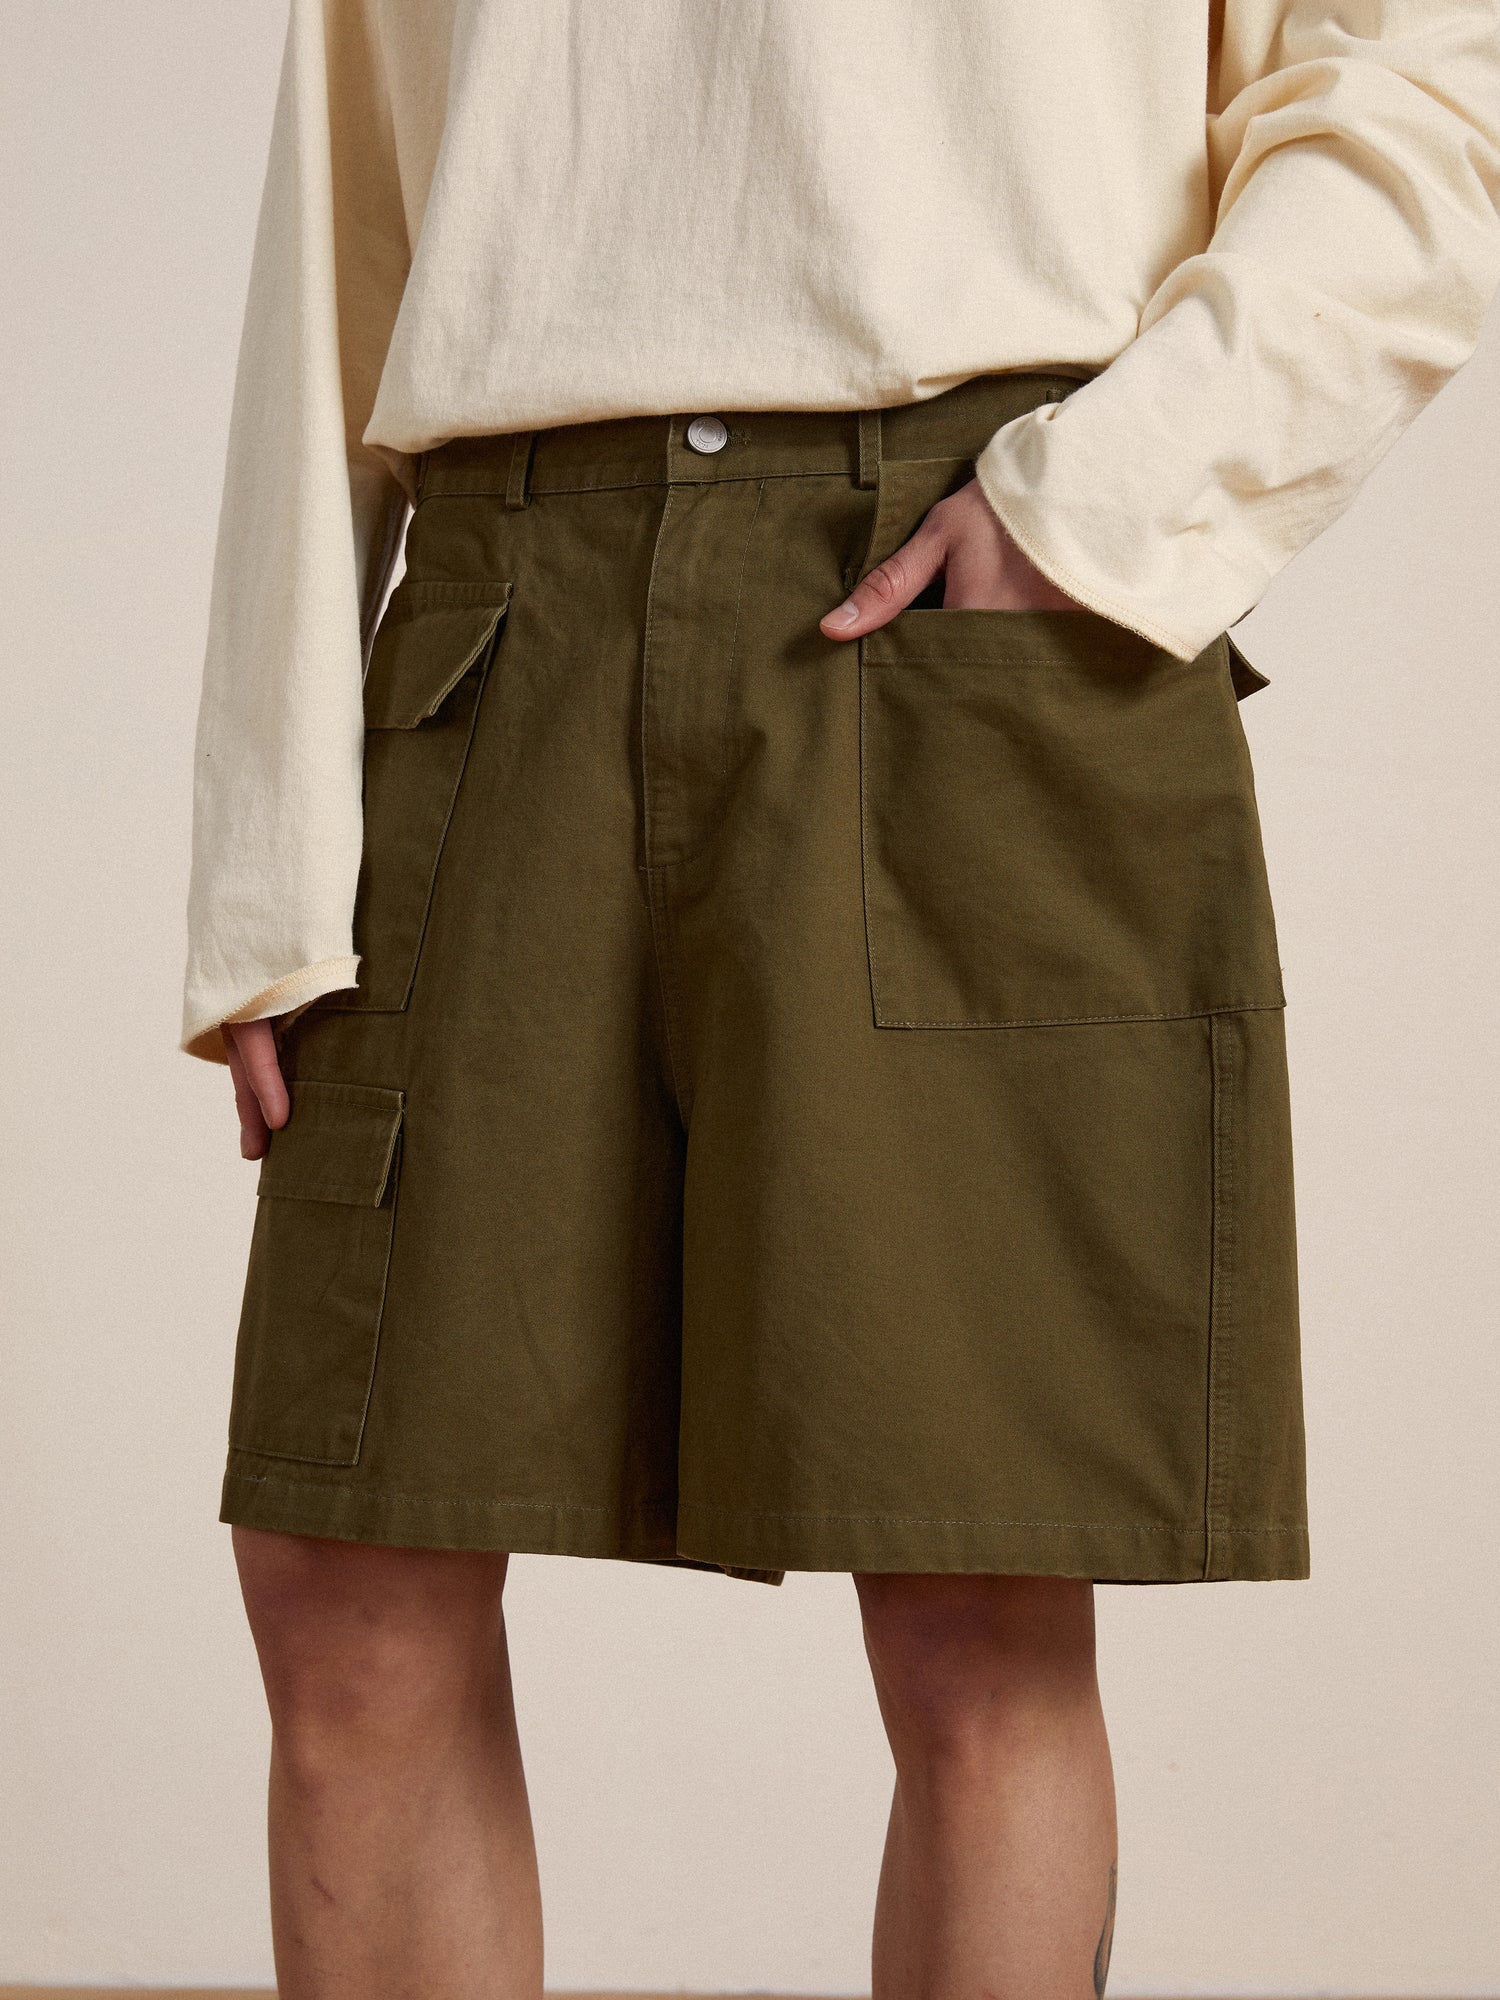 A man wearing Found twill cargo shorts with adjustable waist tabs and a white t-shirt.